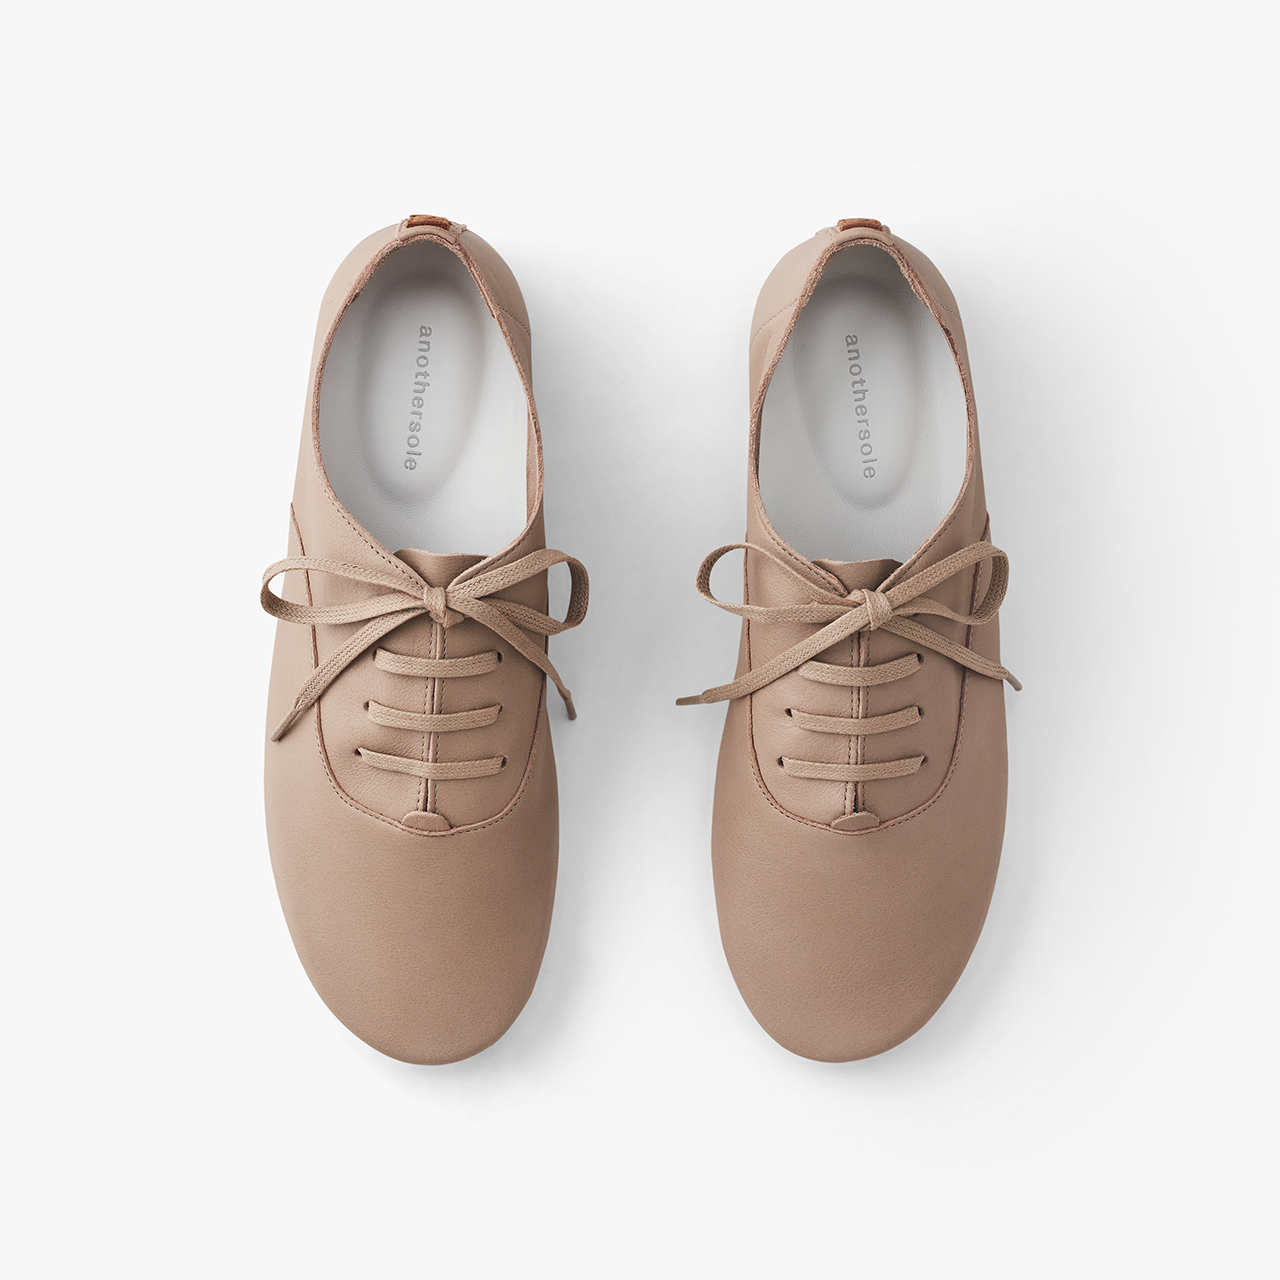 Paloma - Fog – INTL Anothersole | Best Everyday Shoes